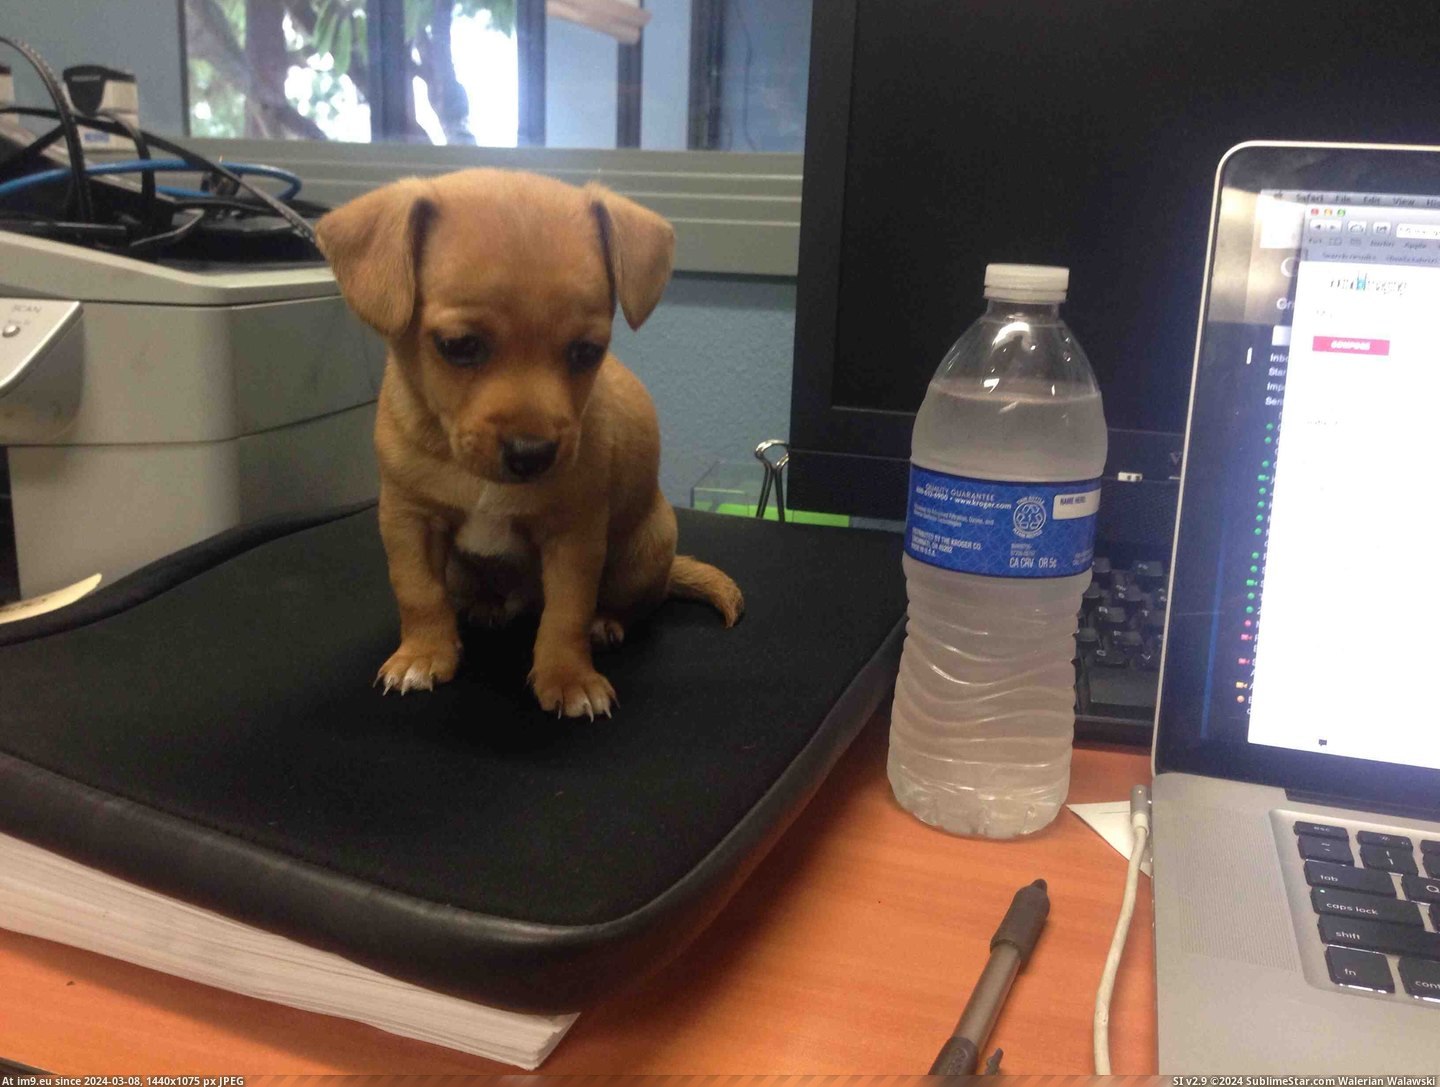 #Work #Desk #Guy [Aww] Came to work and found this little guy on my desk Pic. (Изображение из альбом My r/AWW favs))